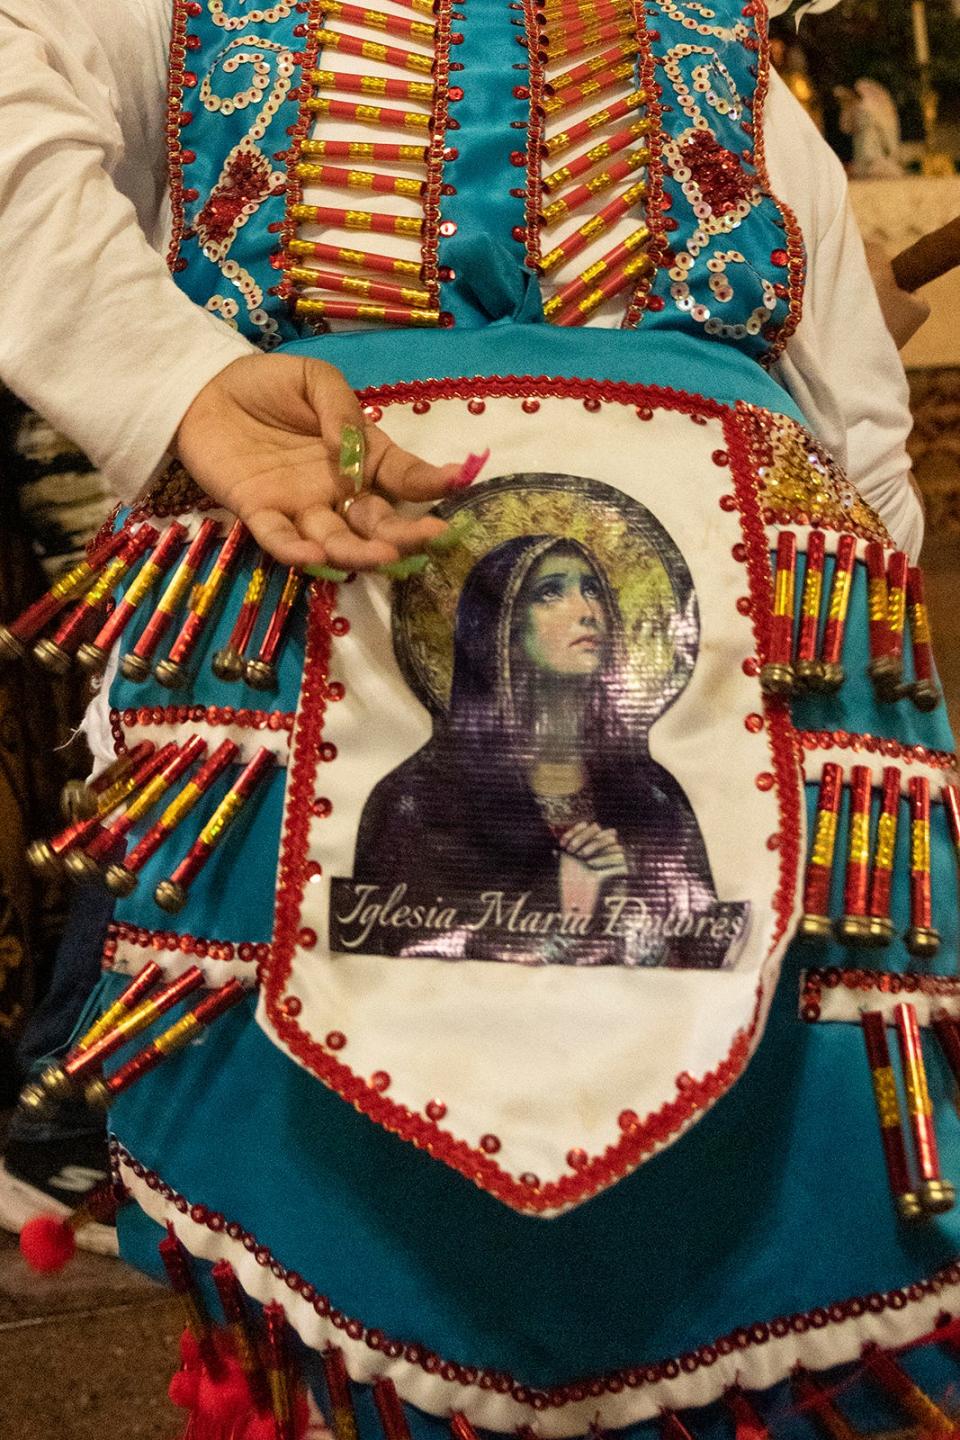 Members of Danza Guadalupe dance in Our Lady of Guadalupe Catholic Church last year as they celebrate her feast day, which commemorates the appearance of the Virgin Mary to indigenous peasant Juan Diego in 1531 in Mexico.